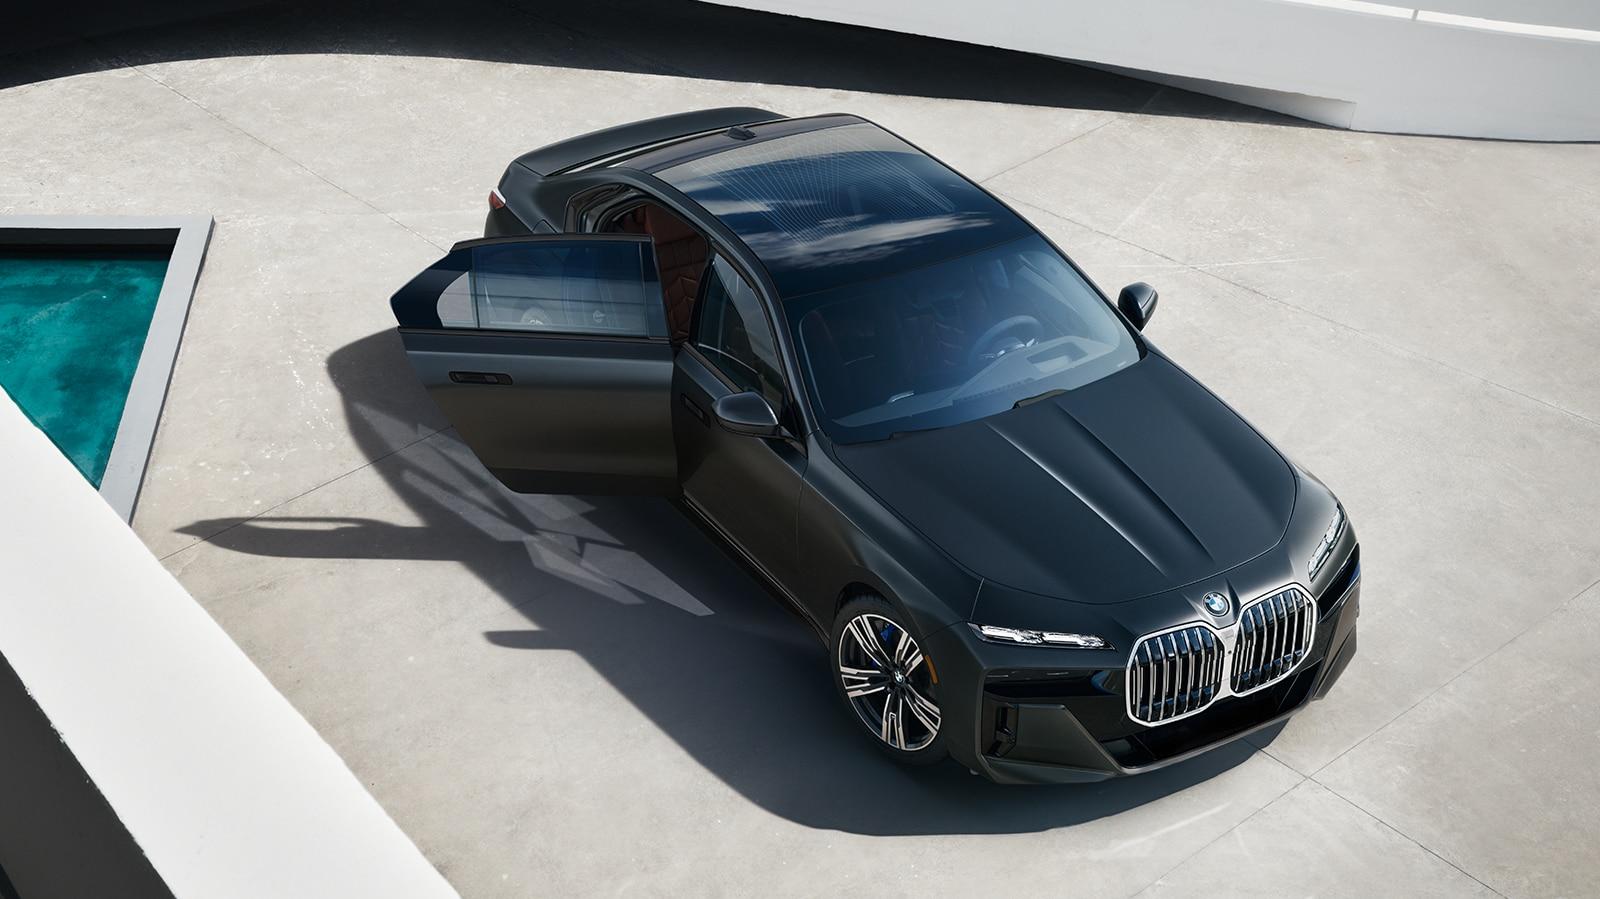 The Brand New Bmw Series Luxury Sedan Will Take Your Daily